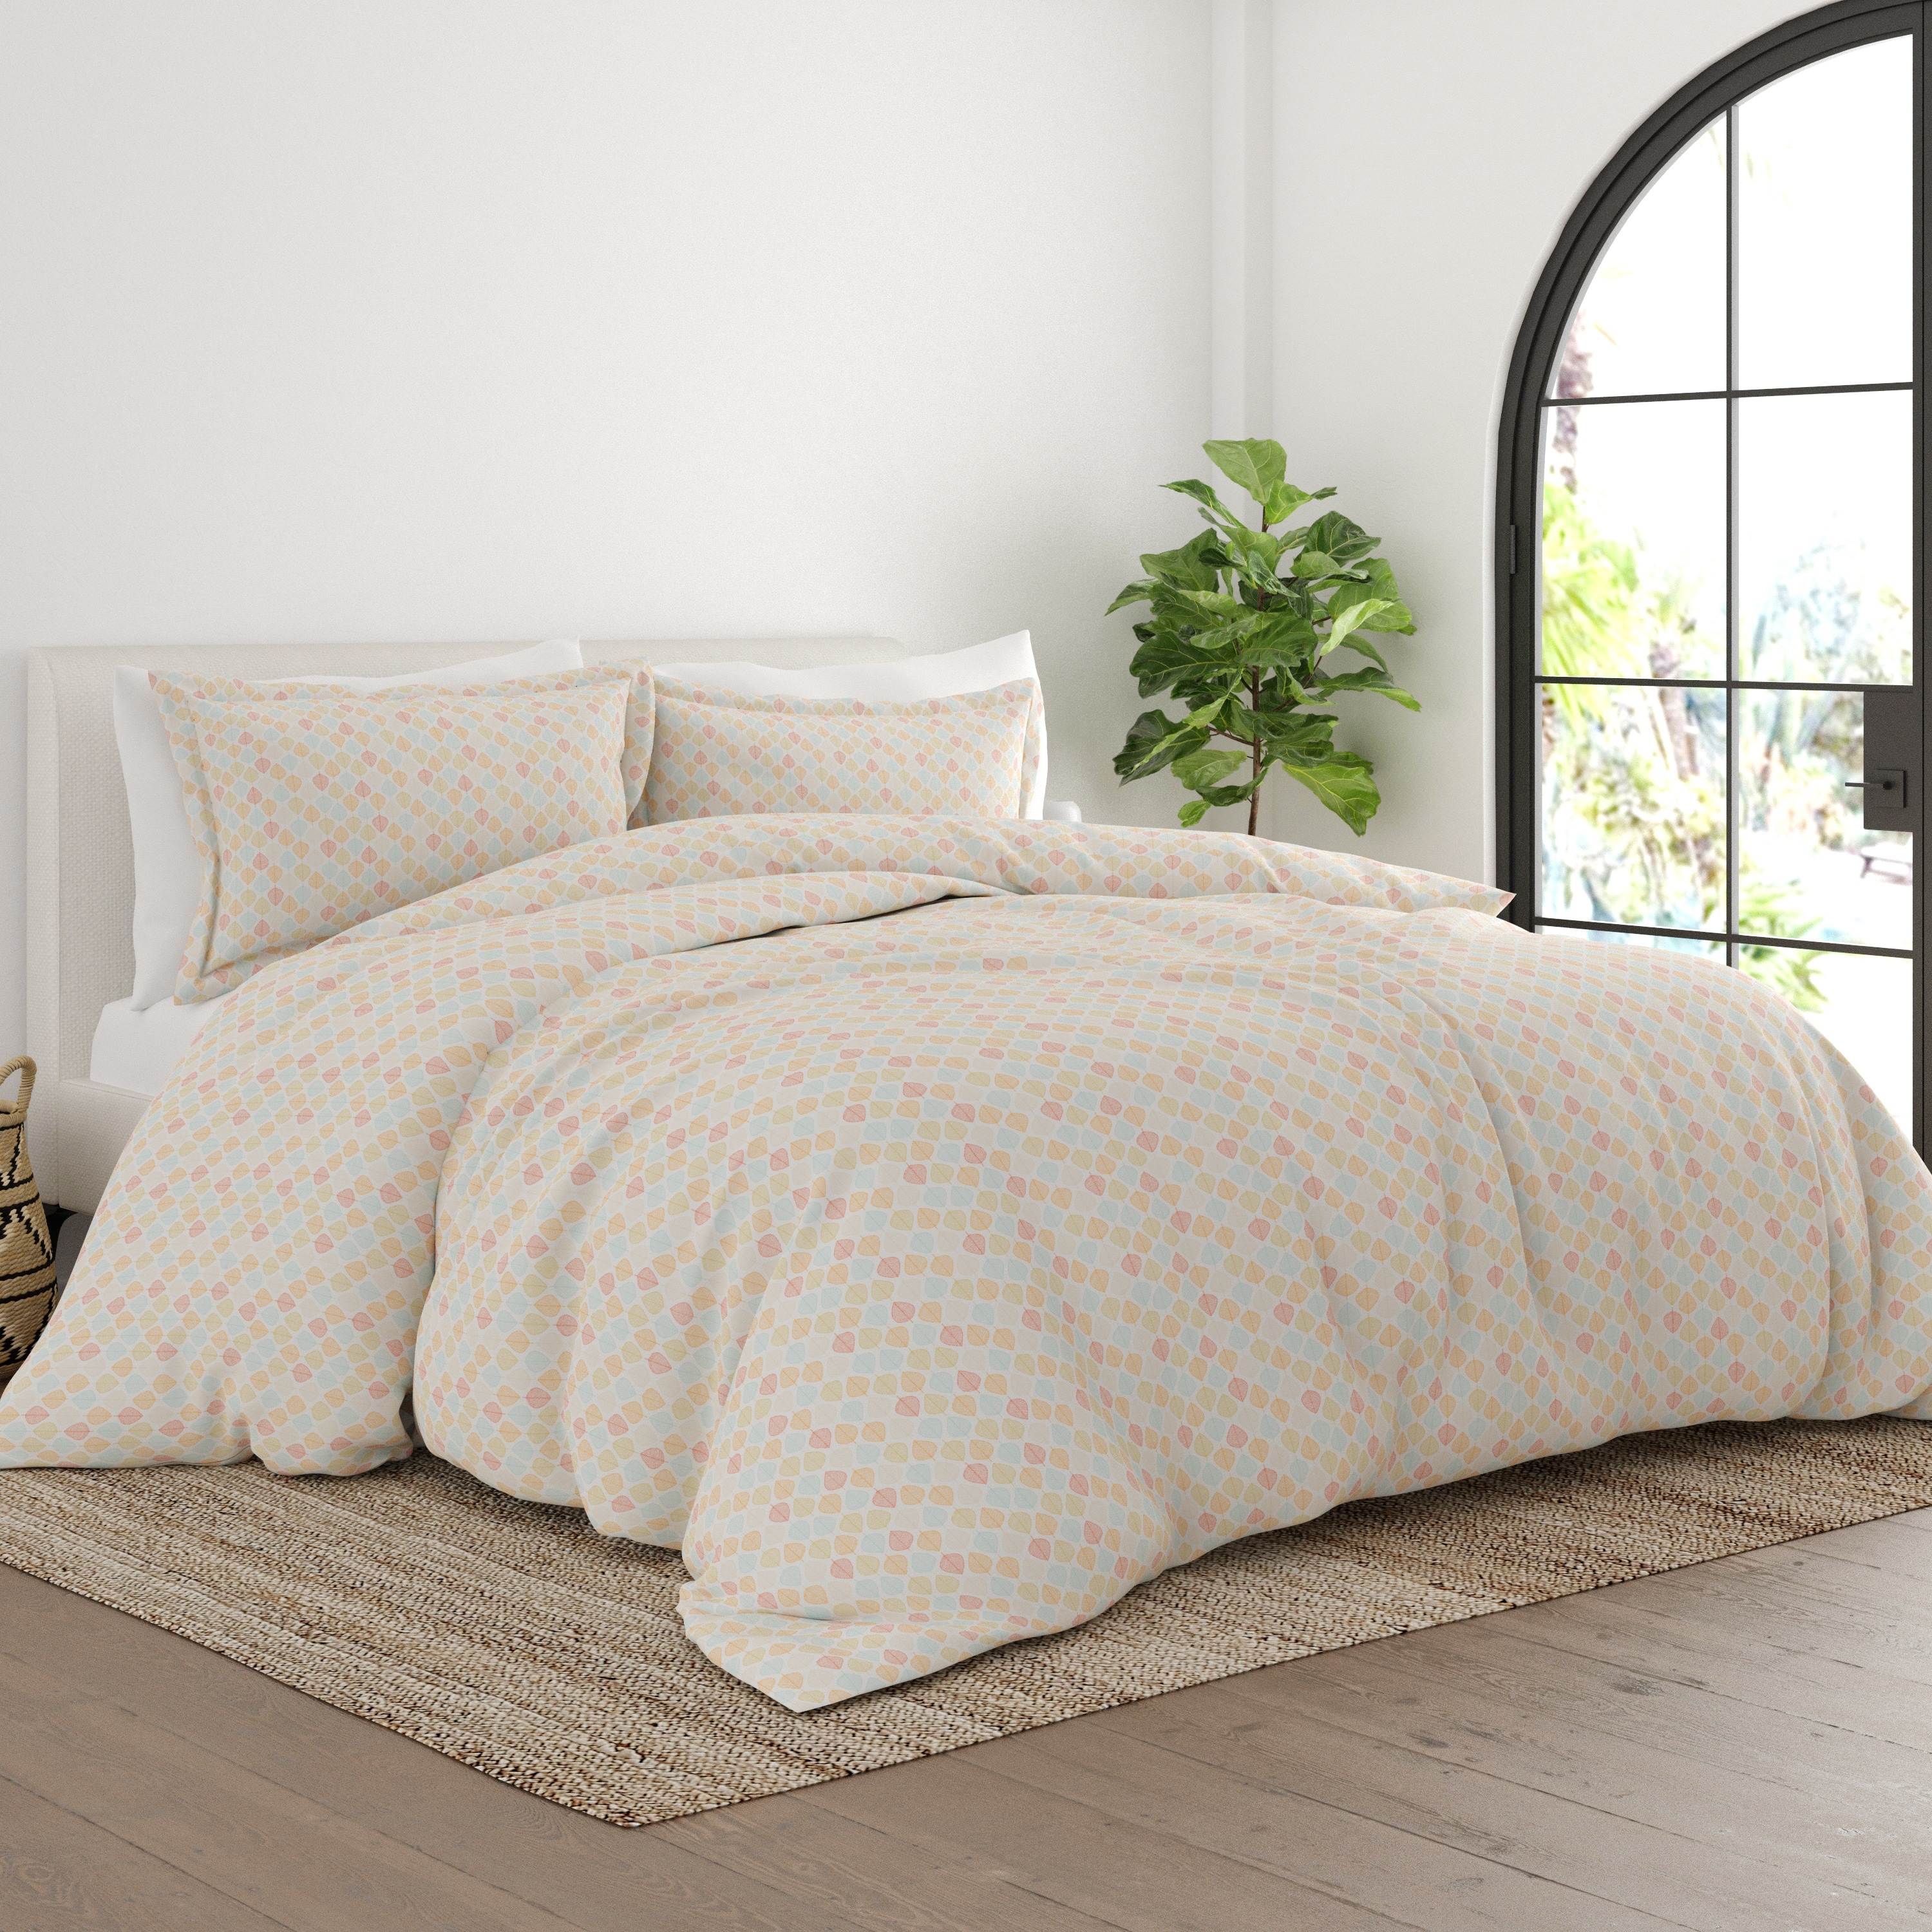 https://ak1.ostkcdn.com/images/products/is/images/direct/51820b3ad0e12af4bed94f17afab5b1af0111db2/Soft-Essentials-Oversized-Fall-Foliage-Pattern-3-Piece-Duvet-Cover-Set.jpg